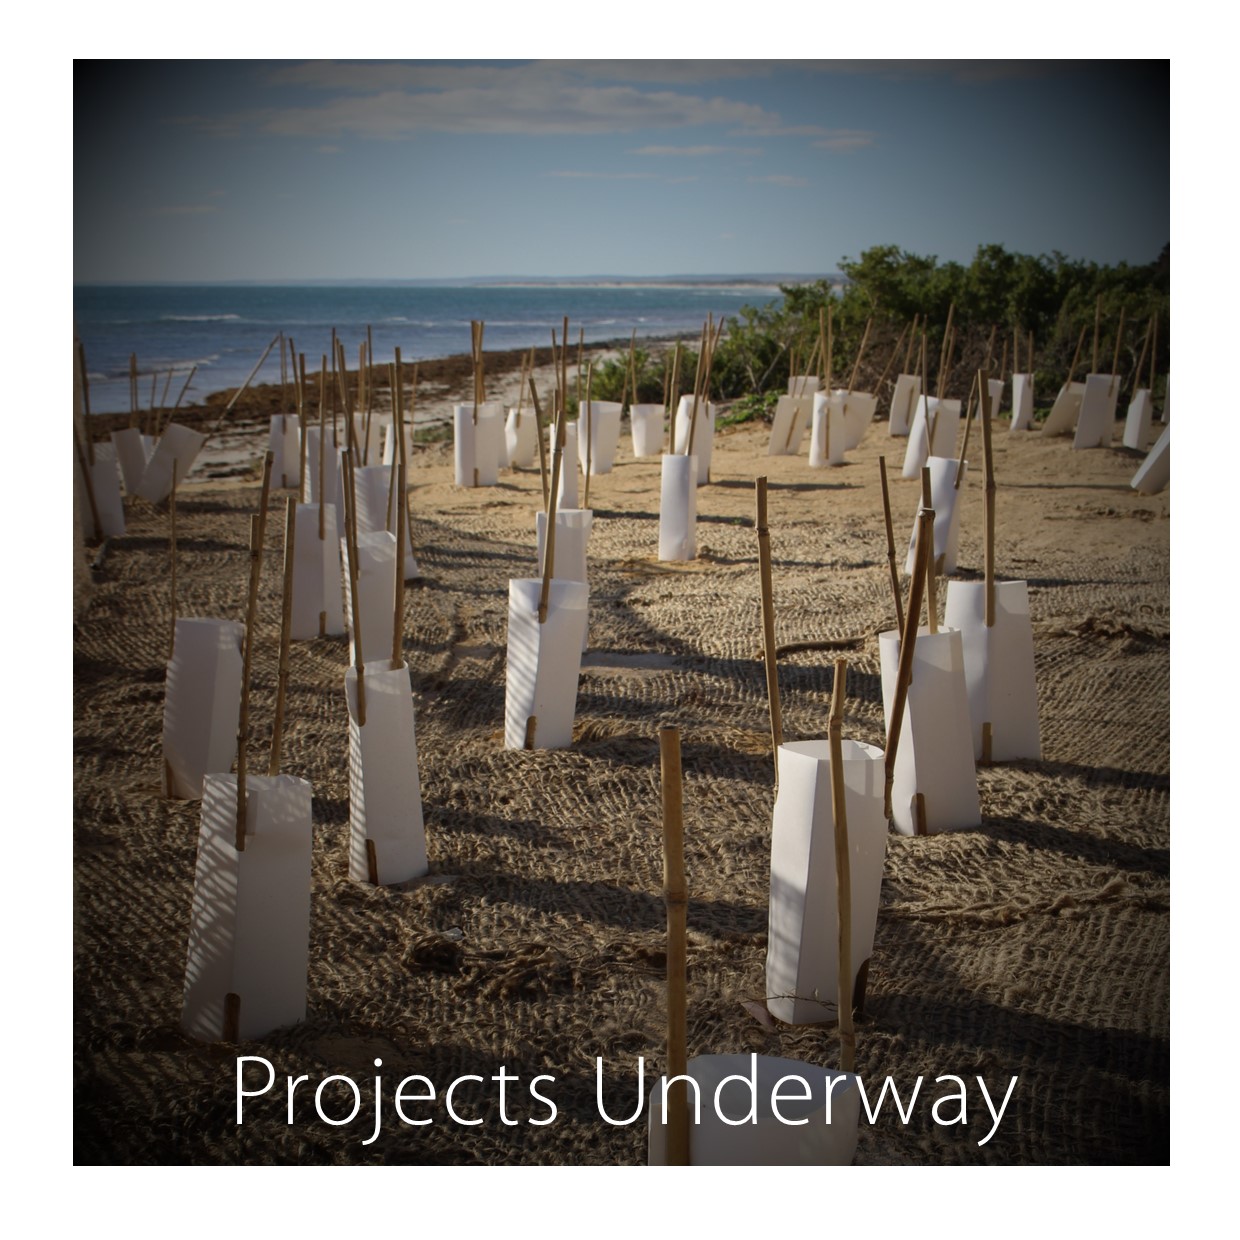 Coastal Adaptation Projects currently underway